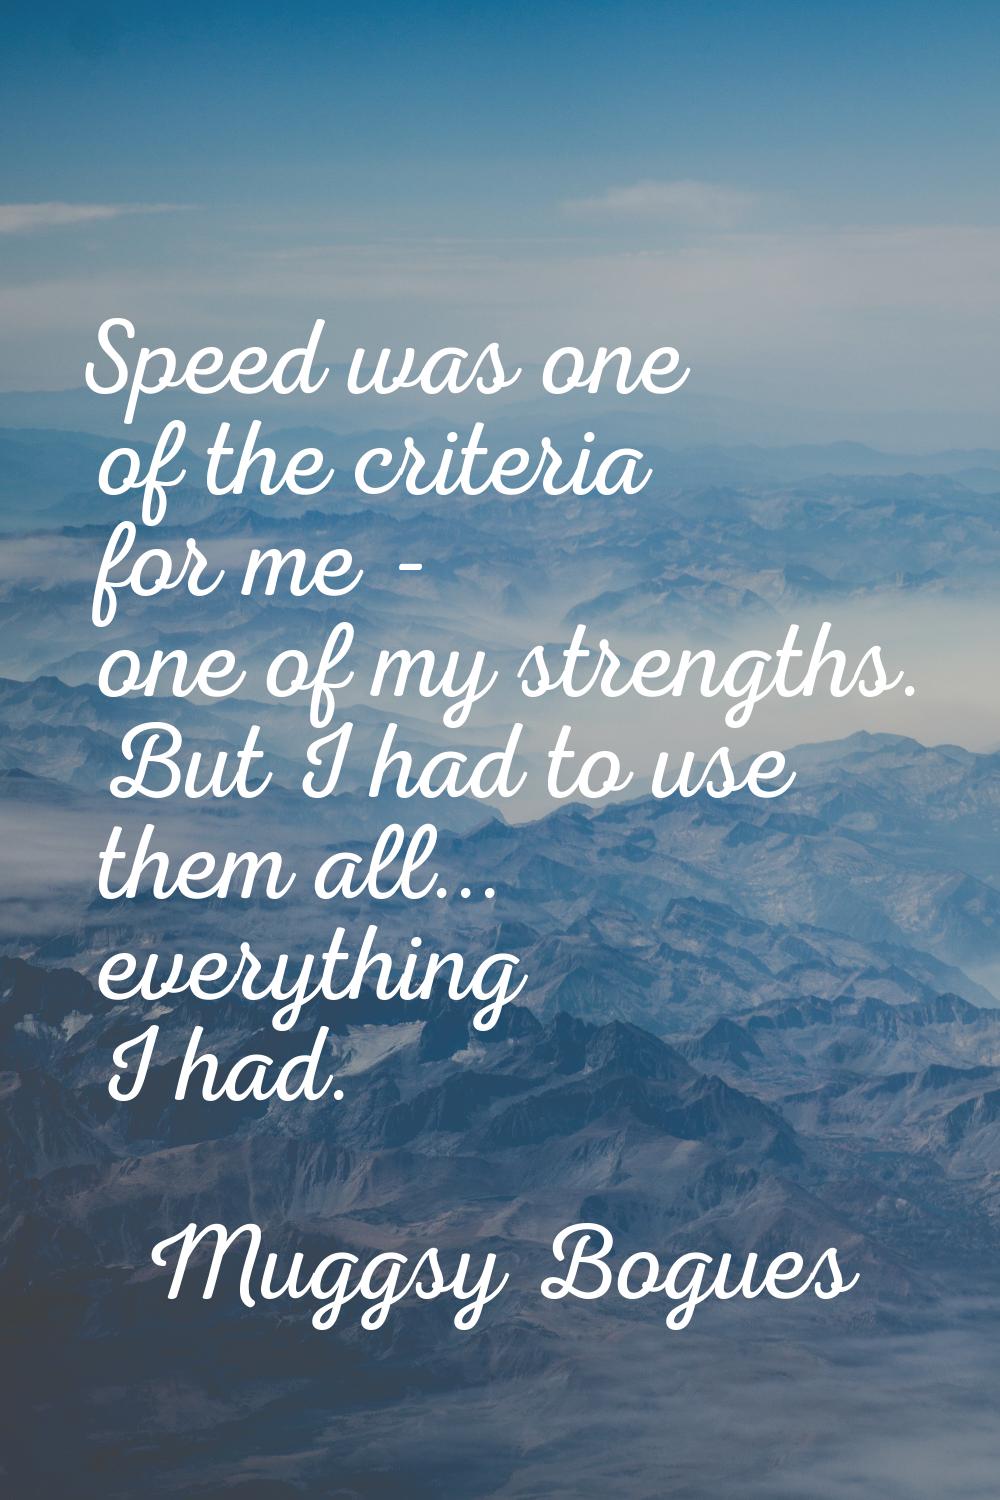 Speed was one of the criteria for me - one of my strengths. But I had to use them all... everything